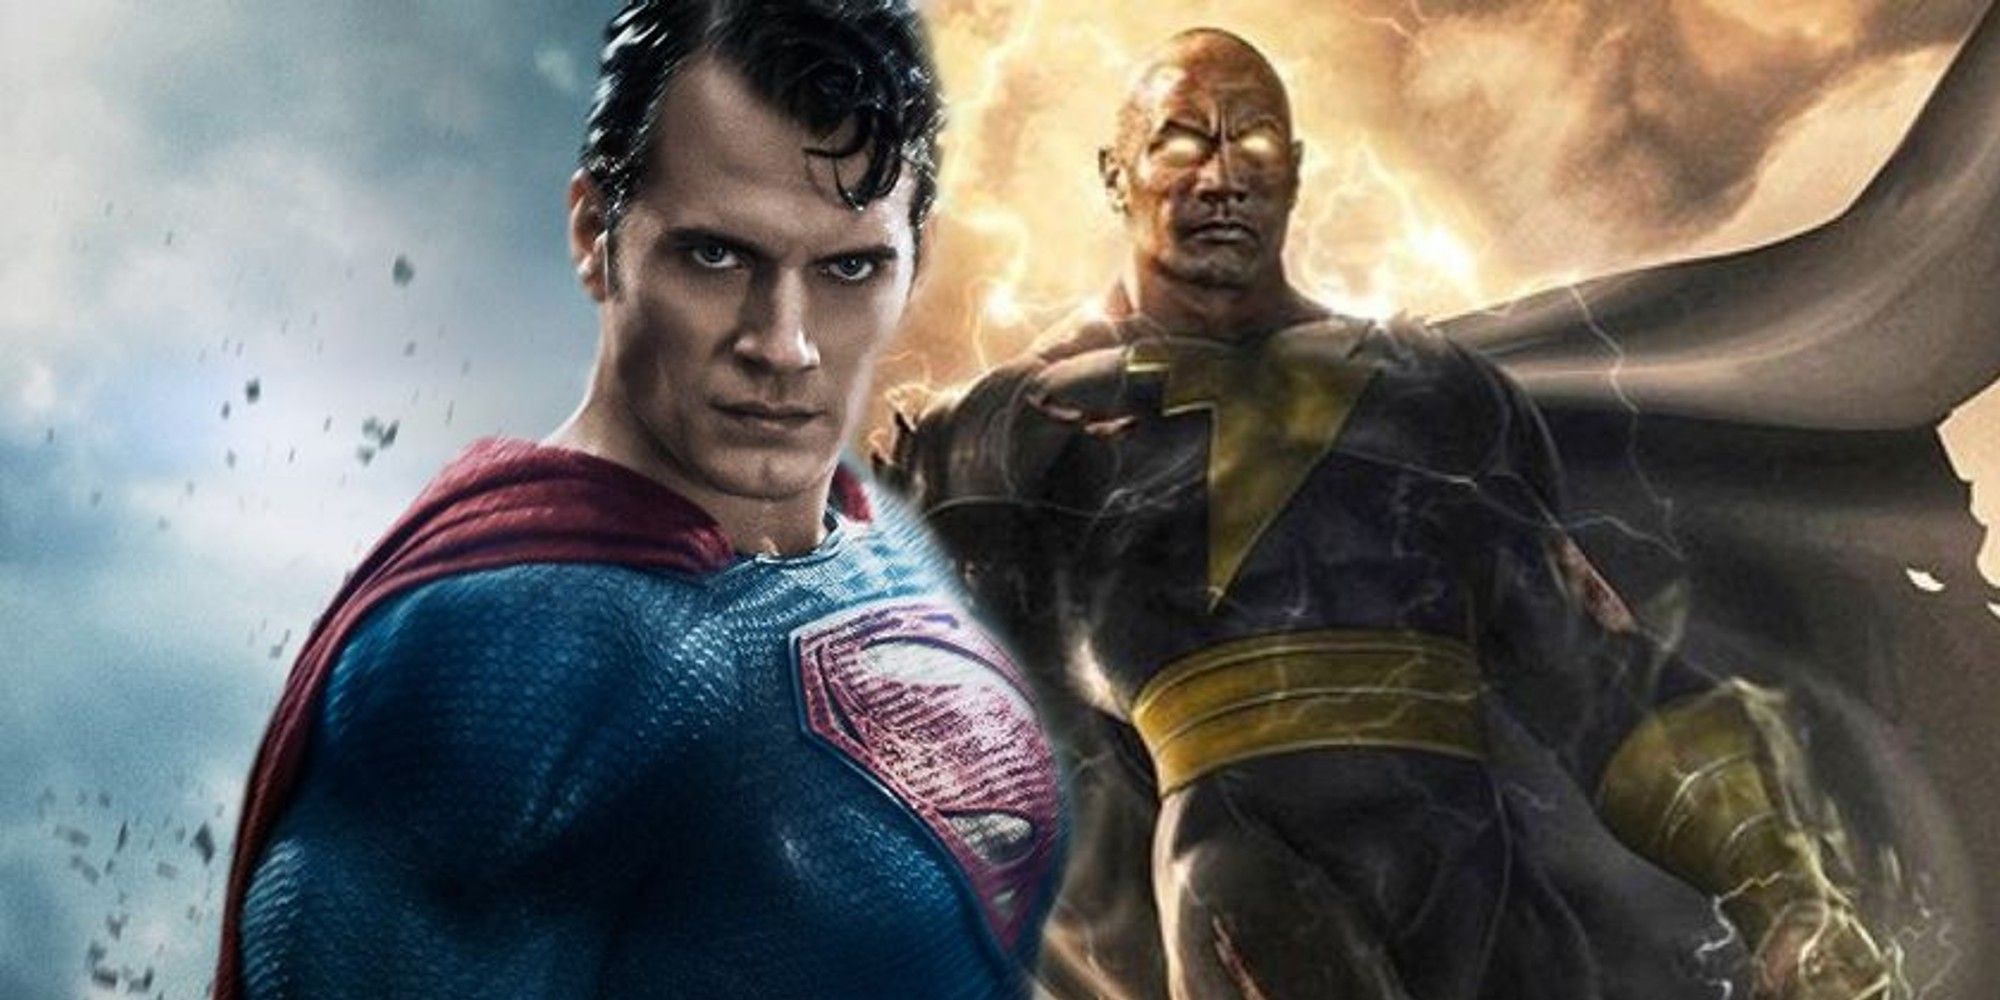 Imagine a fight between Black Adam and Henry Cavill's Superman': DC Fans  Rallying Their Banners To Let Henry Cavill Fight The Rock in Black Adam,  Call it a 'Natural Rivalry' - FandomWire